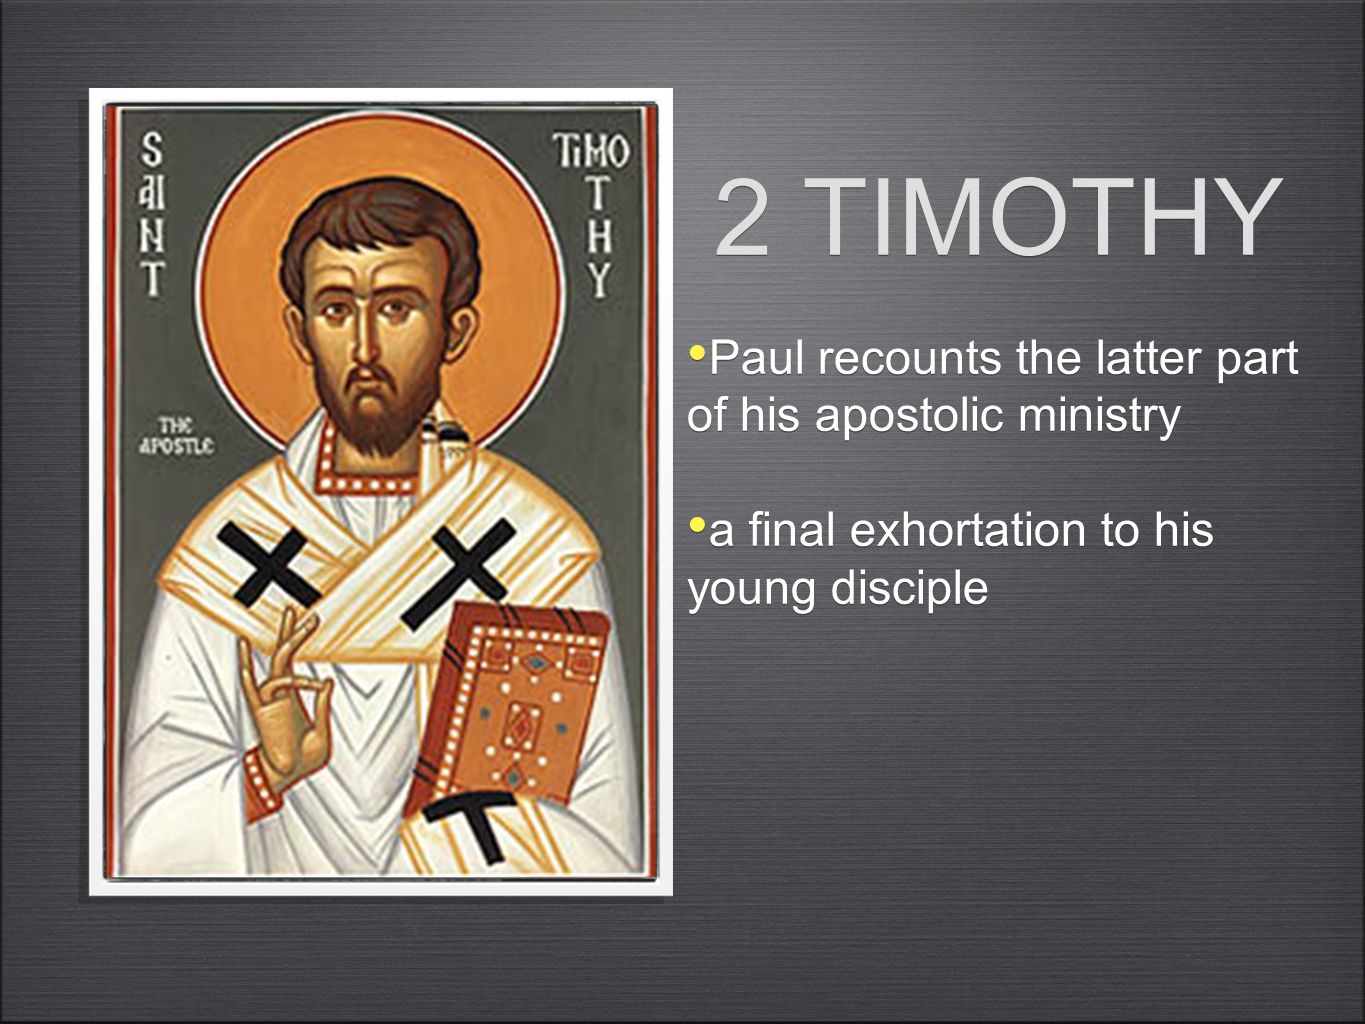 2 TIMOTHY Paul recounts the latter part of his apostolic ministry a final exhortation to his young disciple Paul recounts the latter part of his apostolic ministry a final exhortation to his young disciple